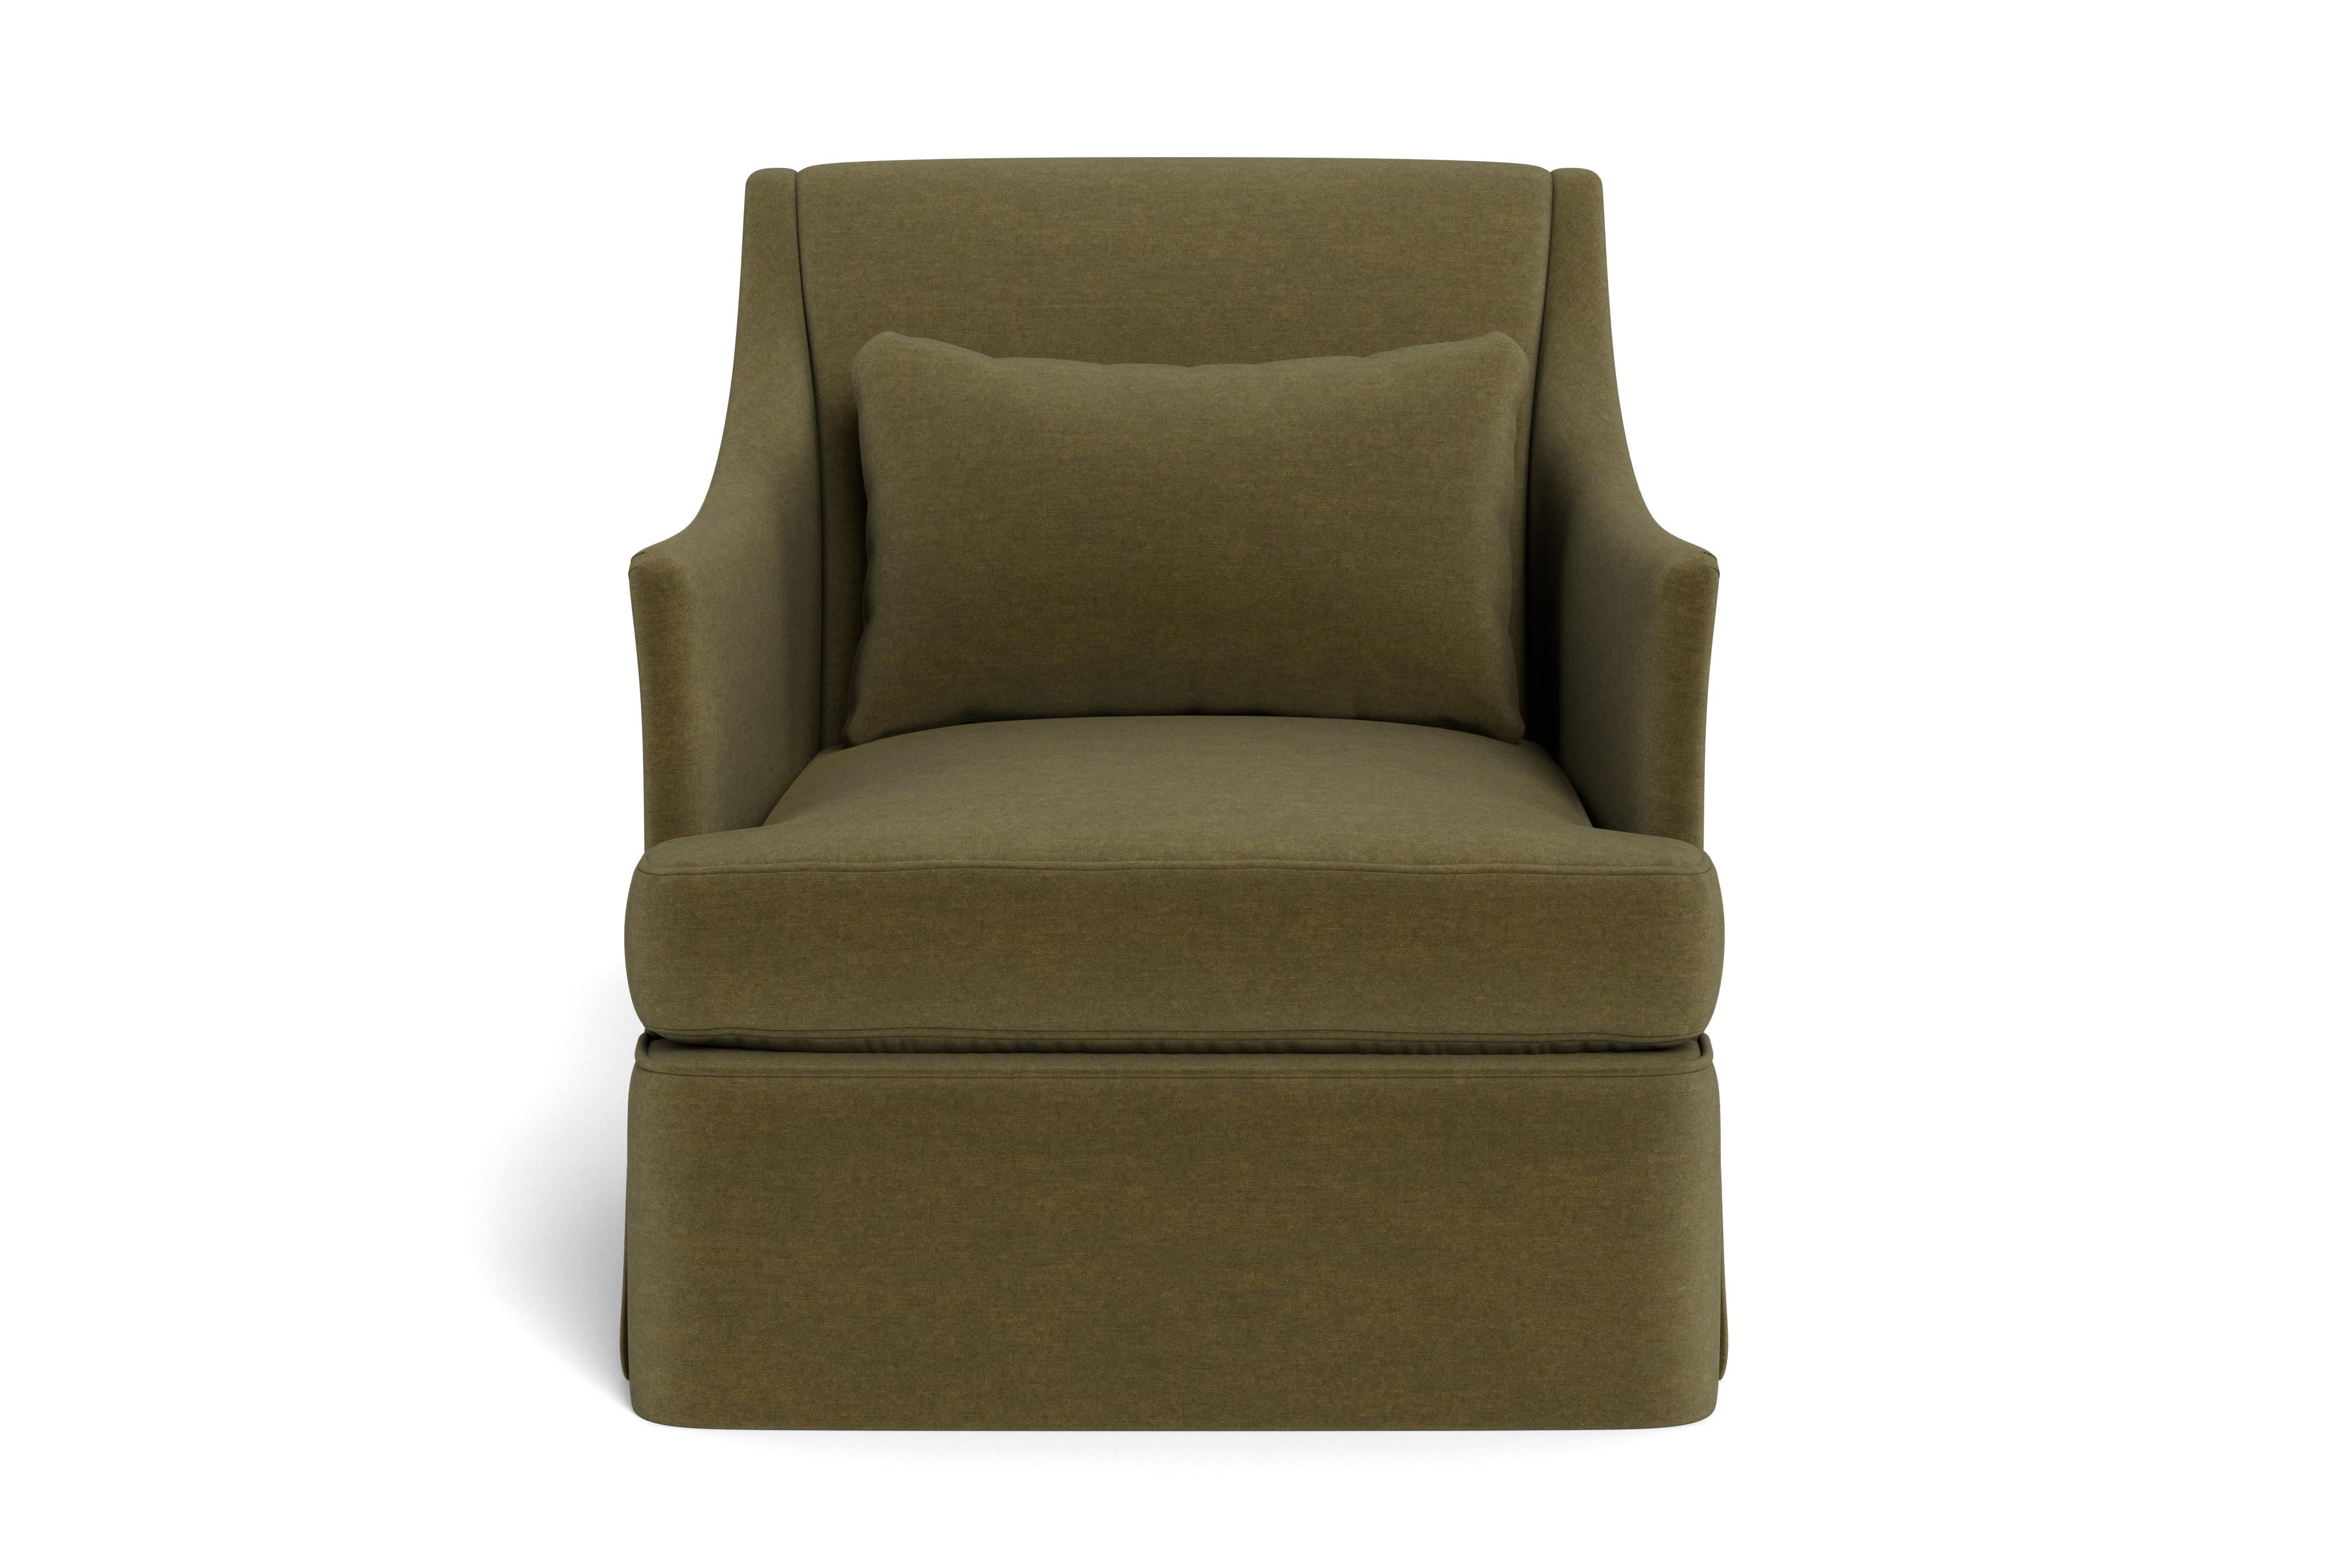 A streamlined armchair that melds the casual appearance of a slipcover with the reassuring elegance of tailored, fitted upholstery. Tight back and single seat cushion. Swivel option available.  Spring down cushions include: individually wrapped